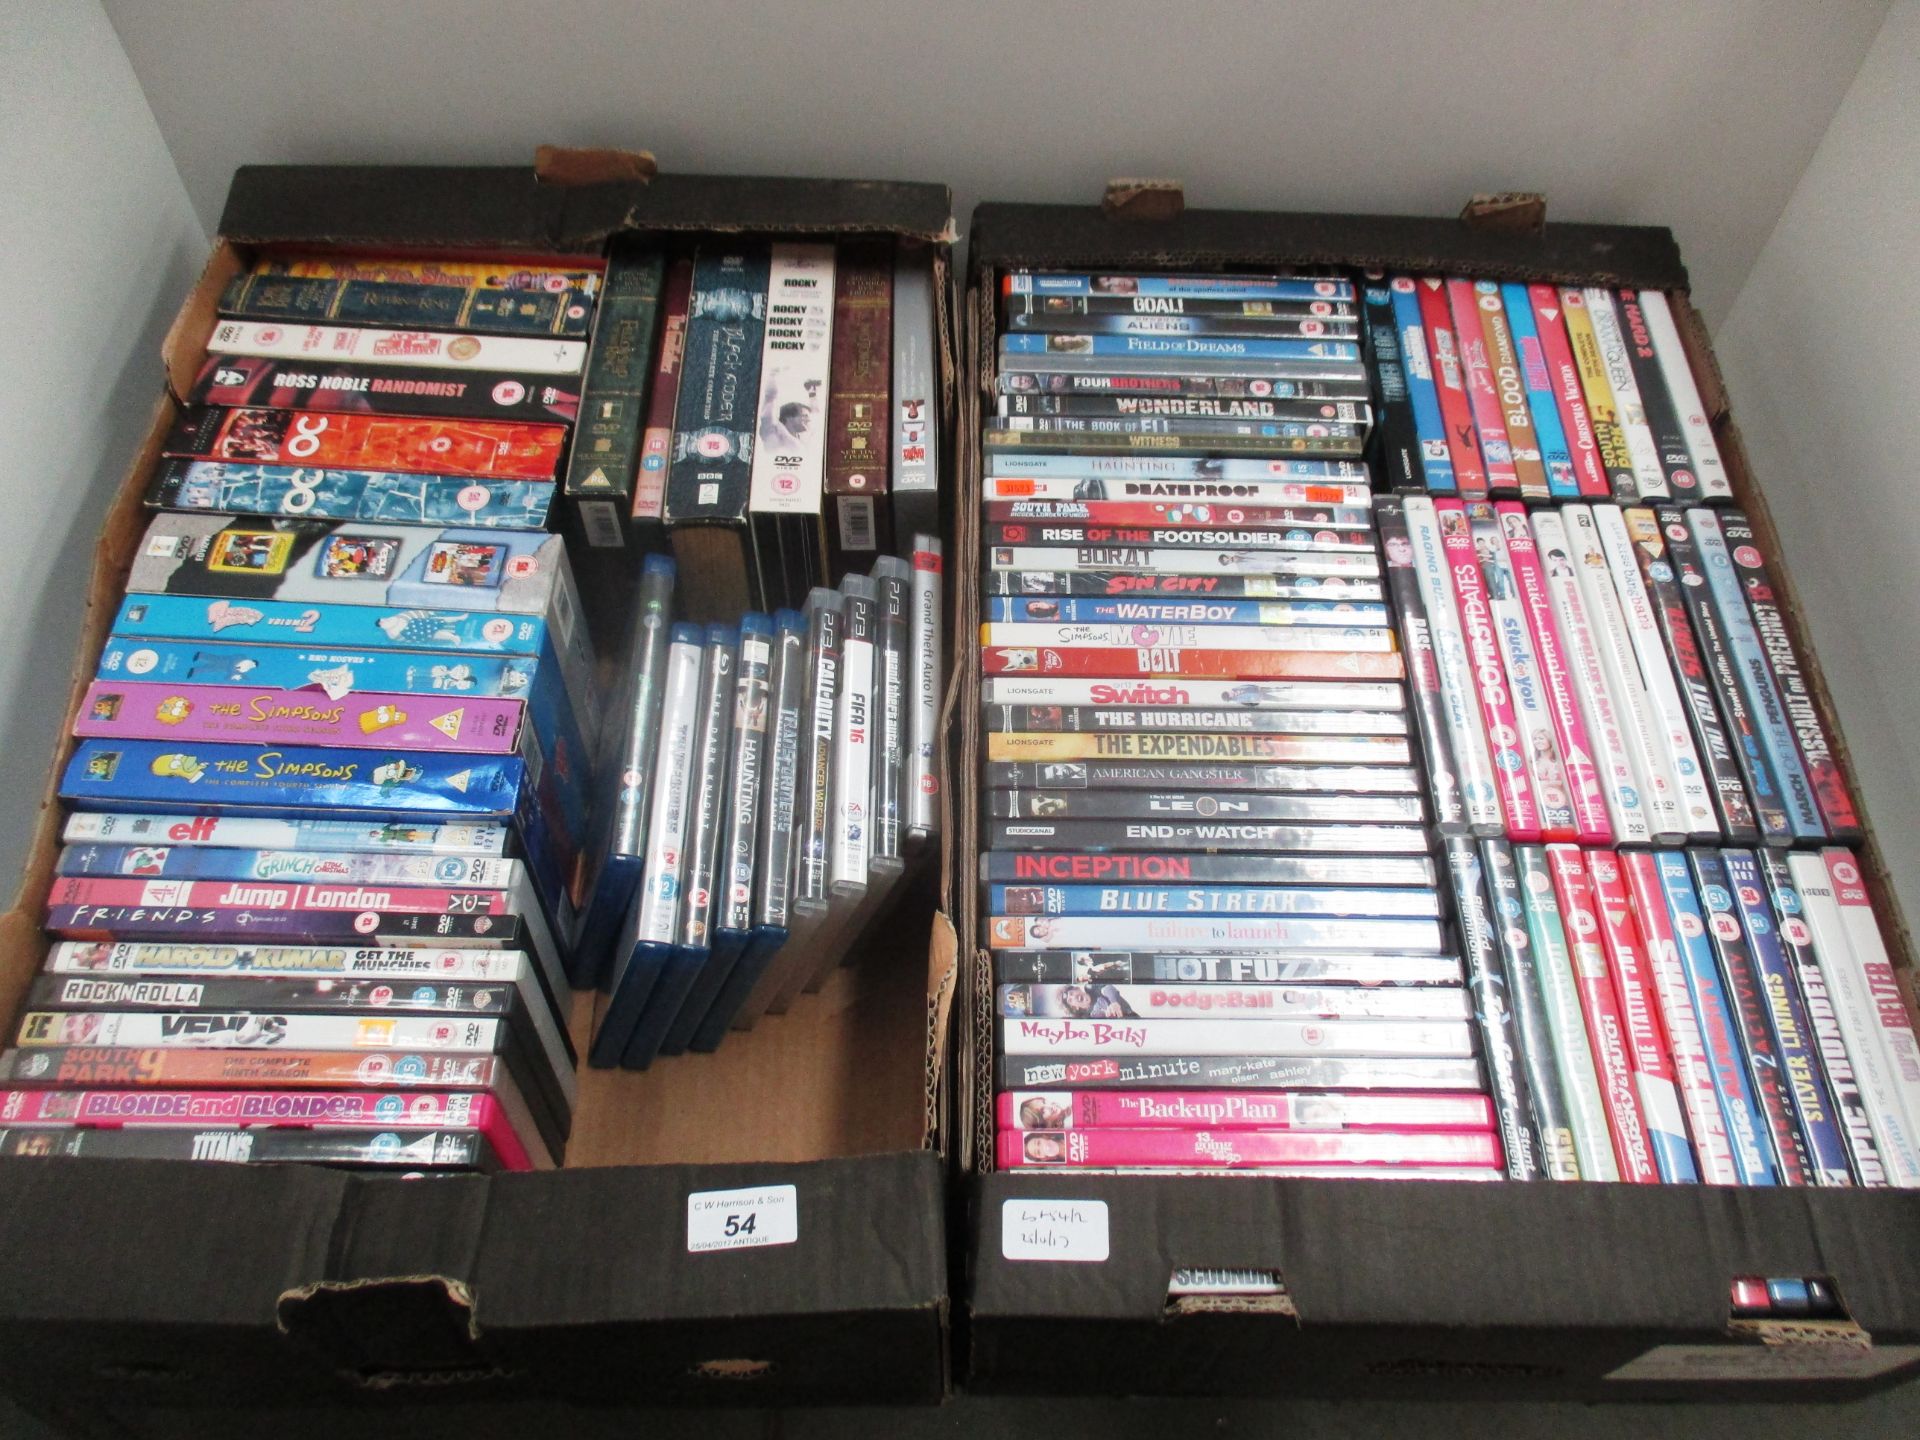 Contents to two boxes 112 items - DVDs, DVD box sets, PS3 games, Blue Ray discs etc - The Simpsons,